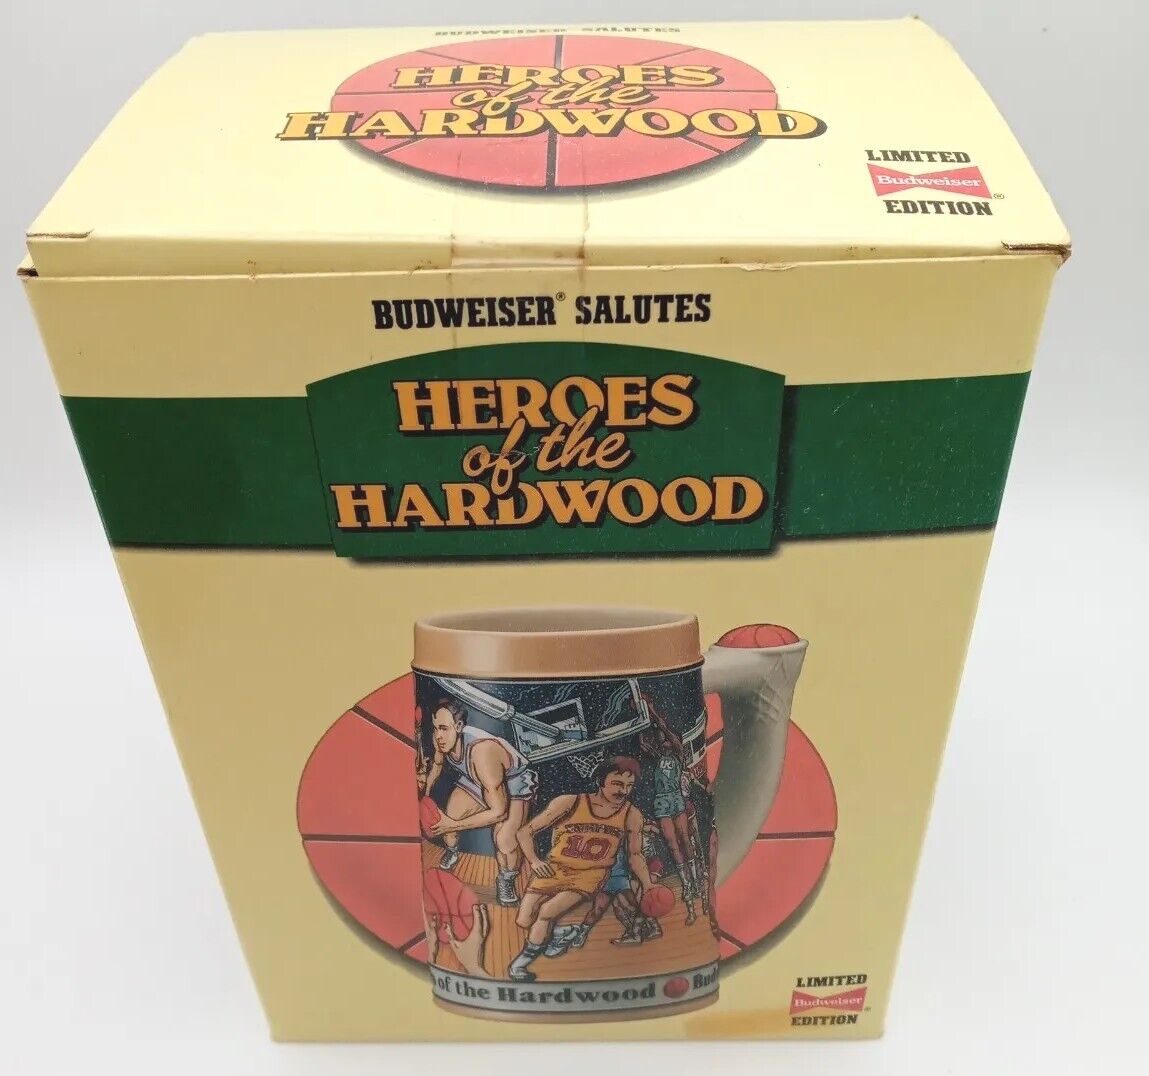 BUDWEISER SALUTES HEROES OF THE HARDWOOD LIMITED EDITION BEER STEIN 1991 NIB